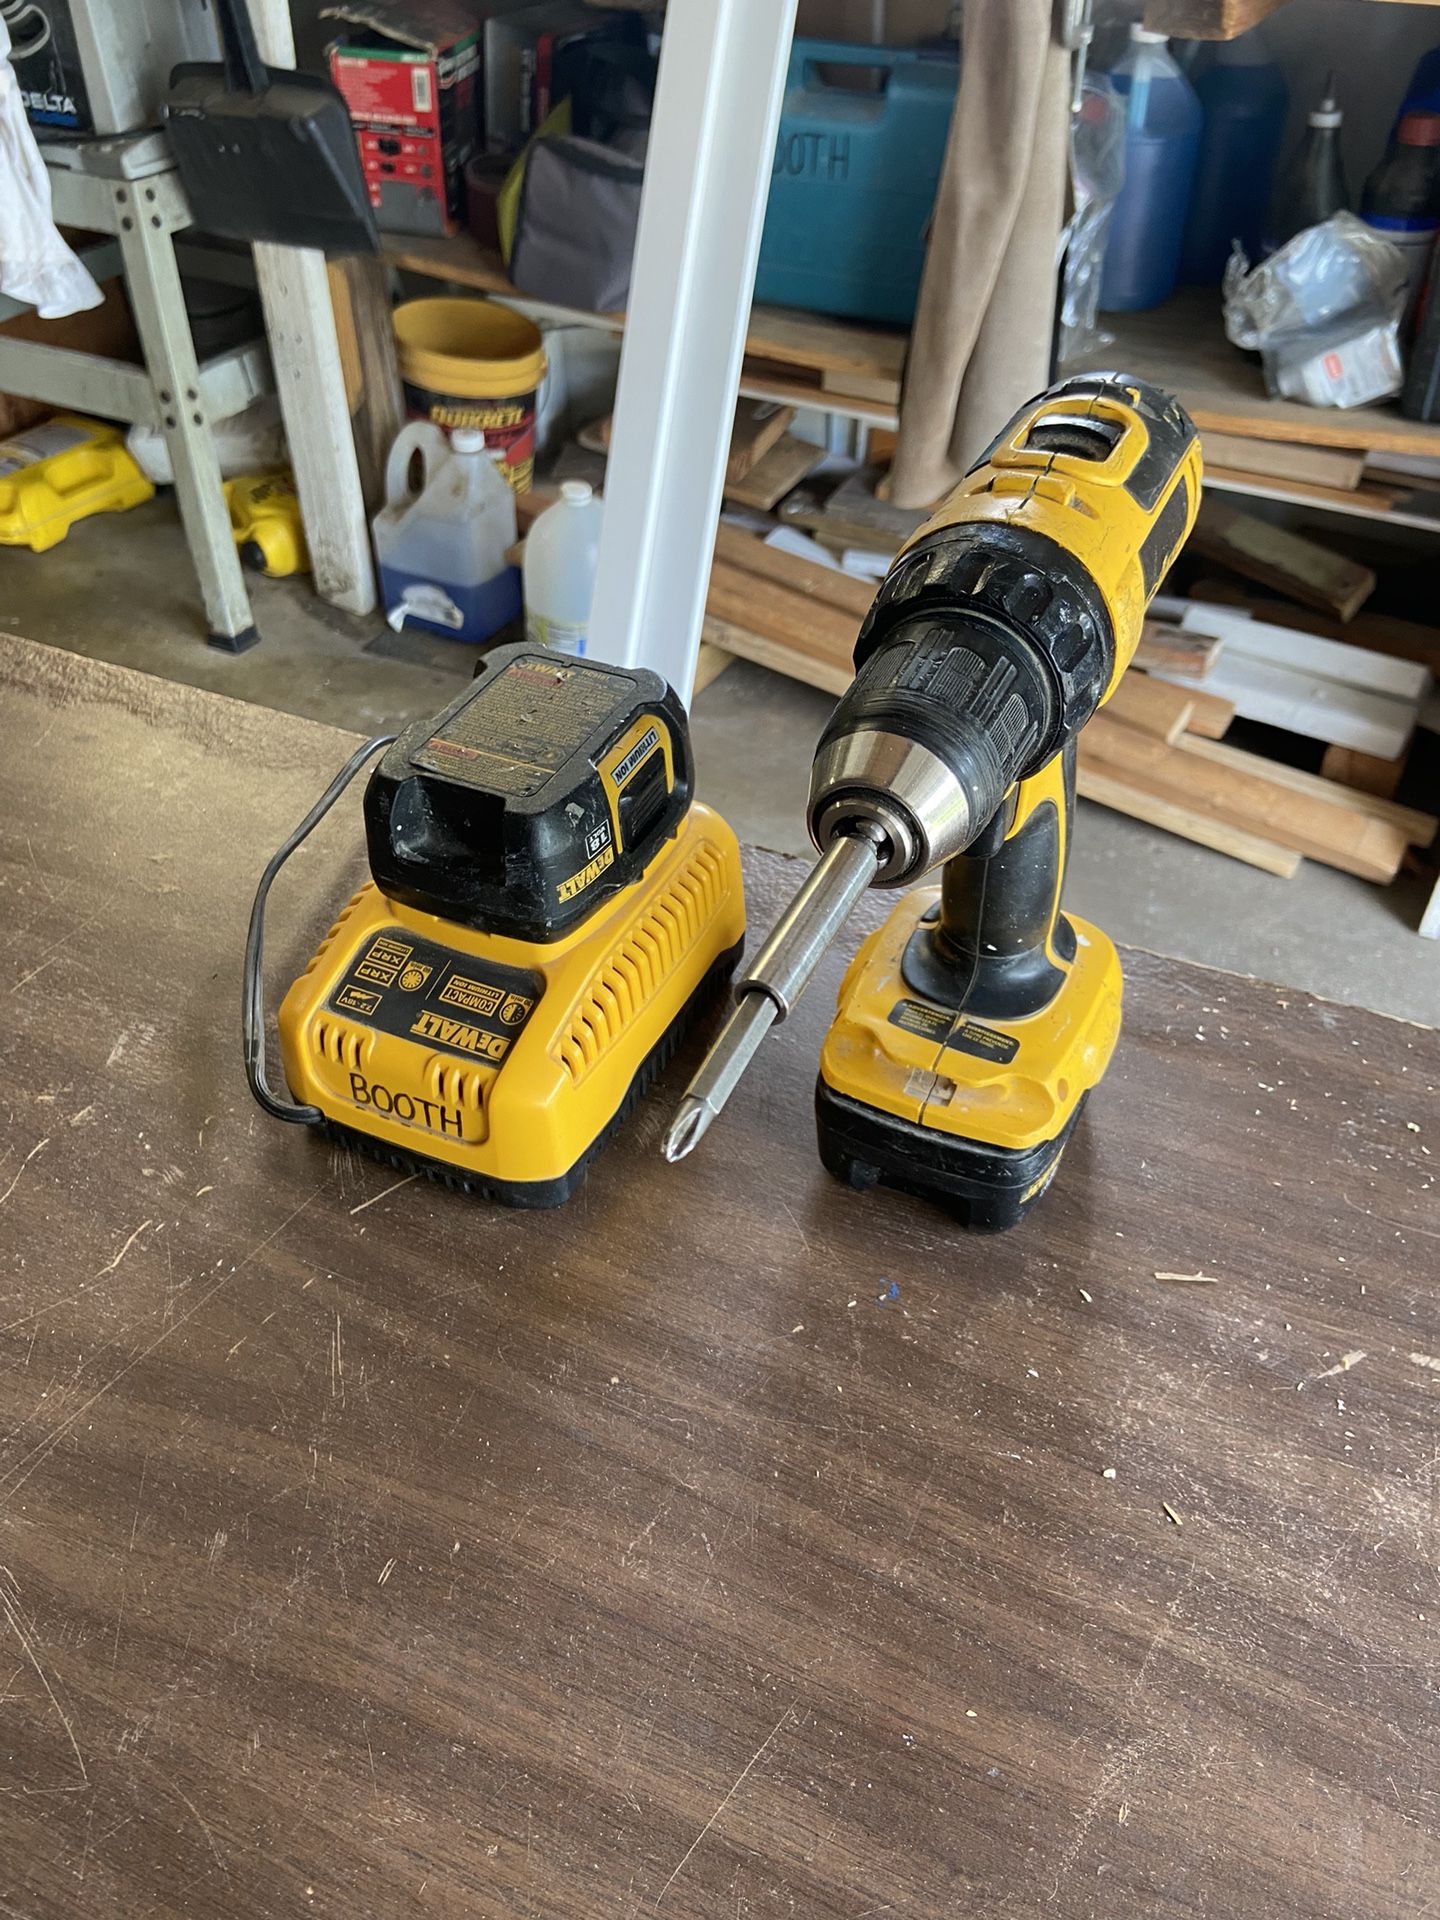 Dewalt 1/2 Drive Cordless Drill DCD760, 2 Batteries And Charger-$70